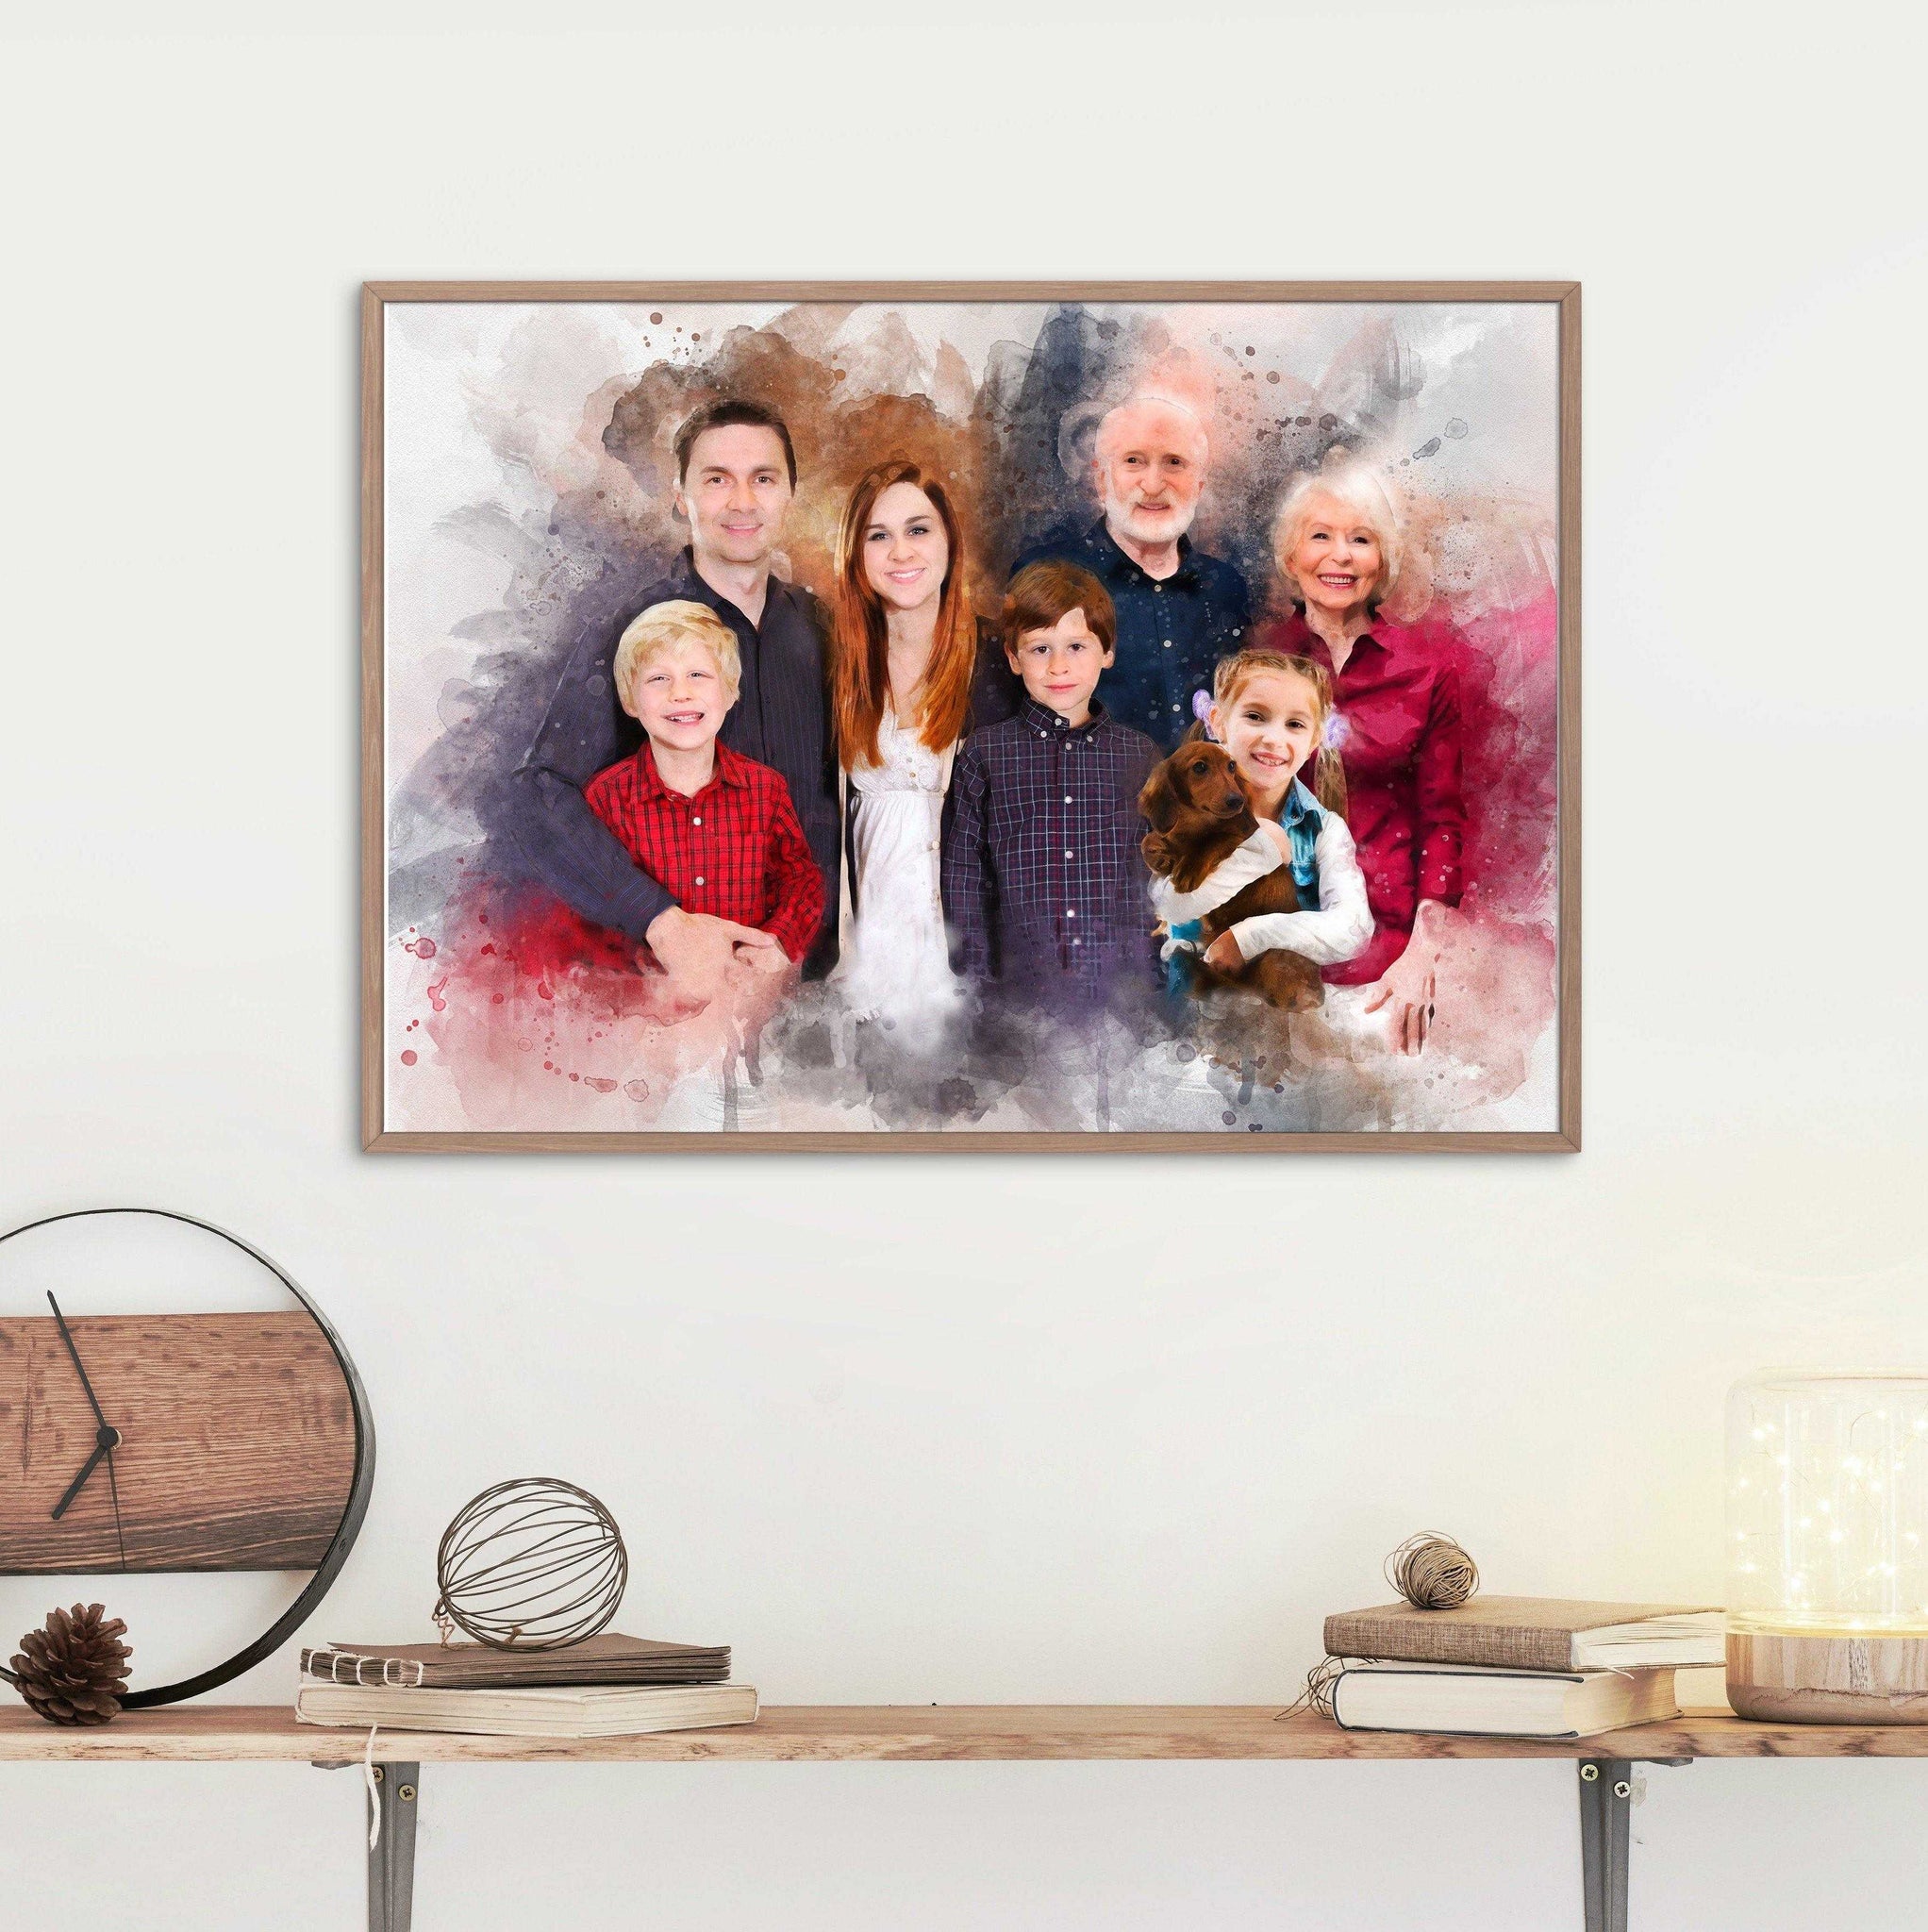 Painted Pictures of Loved Ones | Painting with Deceased Loved Ones on Canvas - FromPicToArt